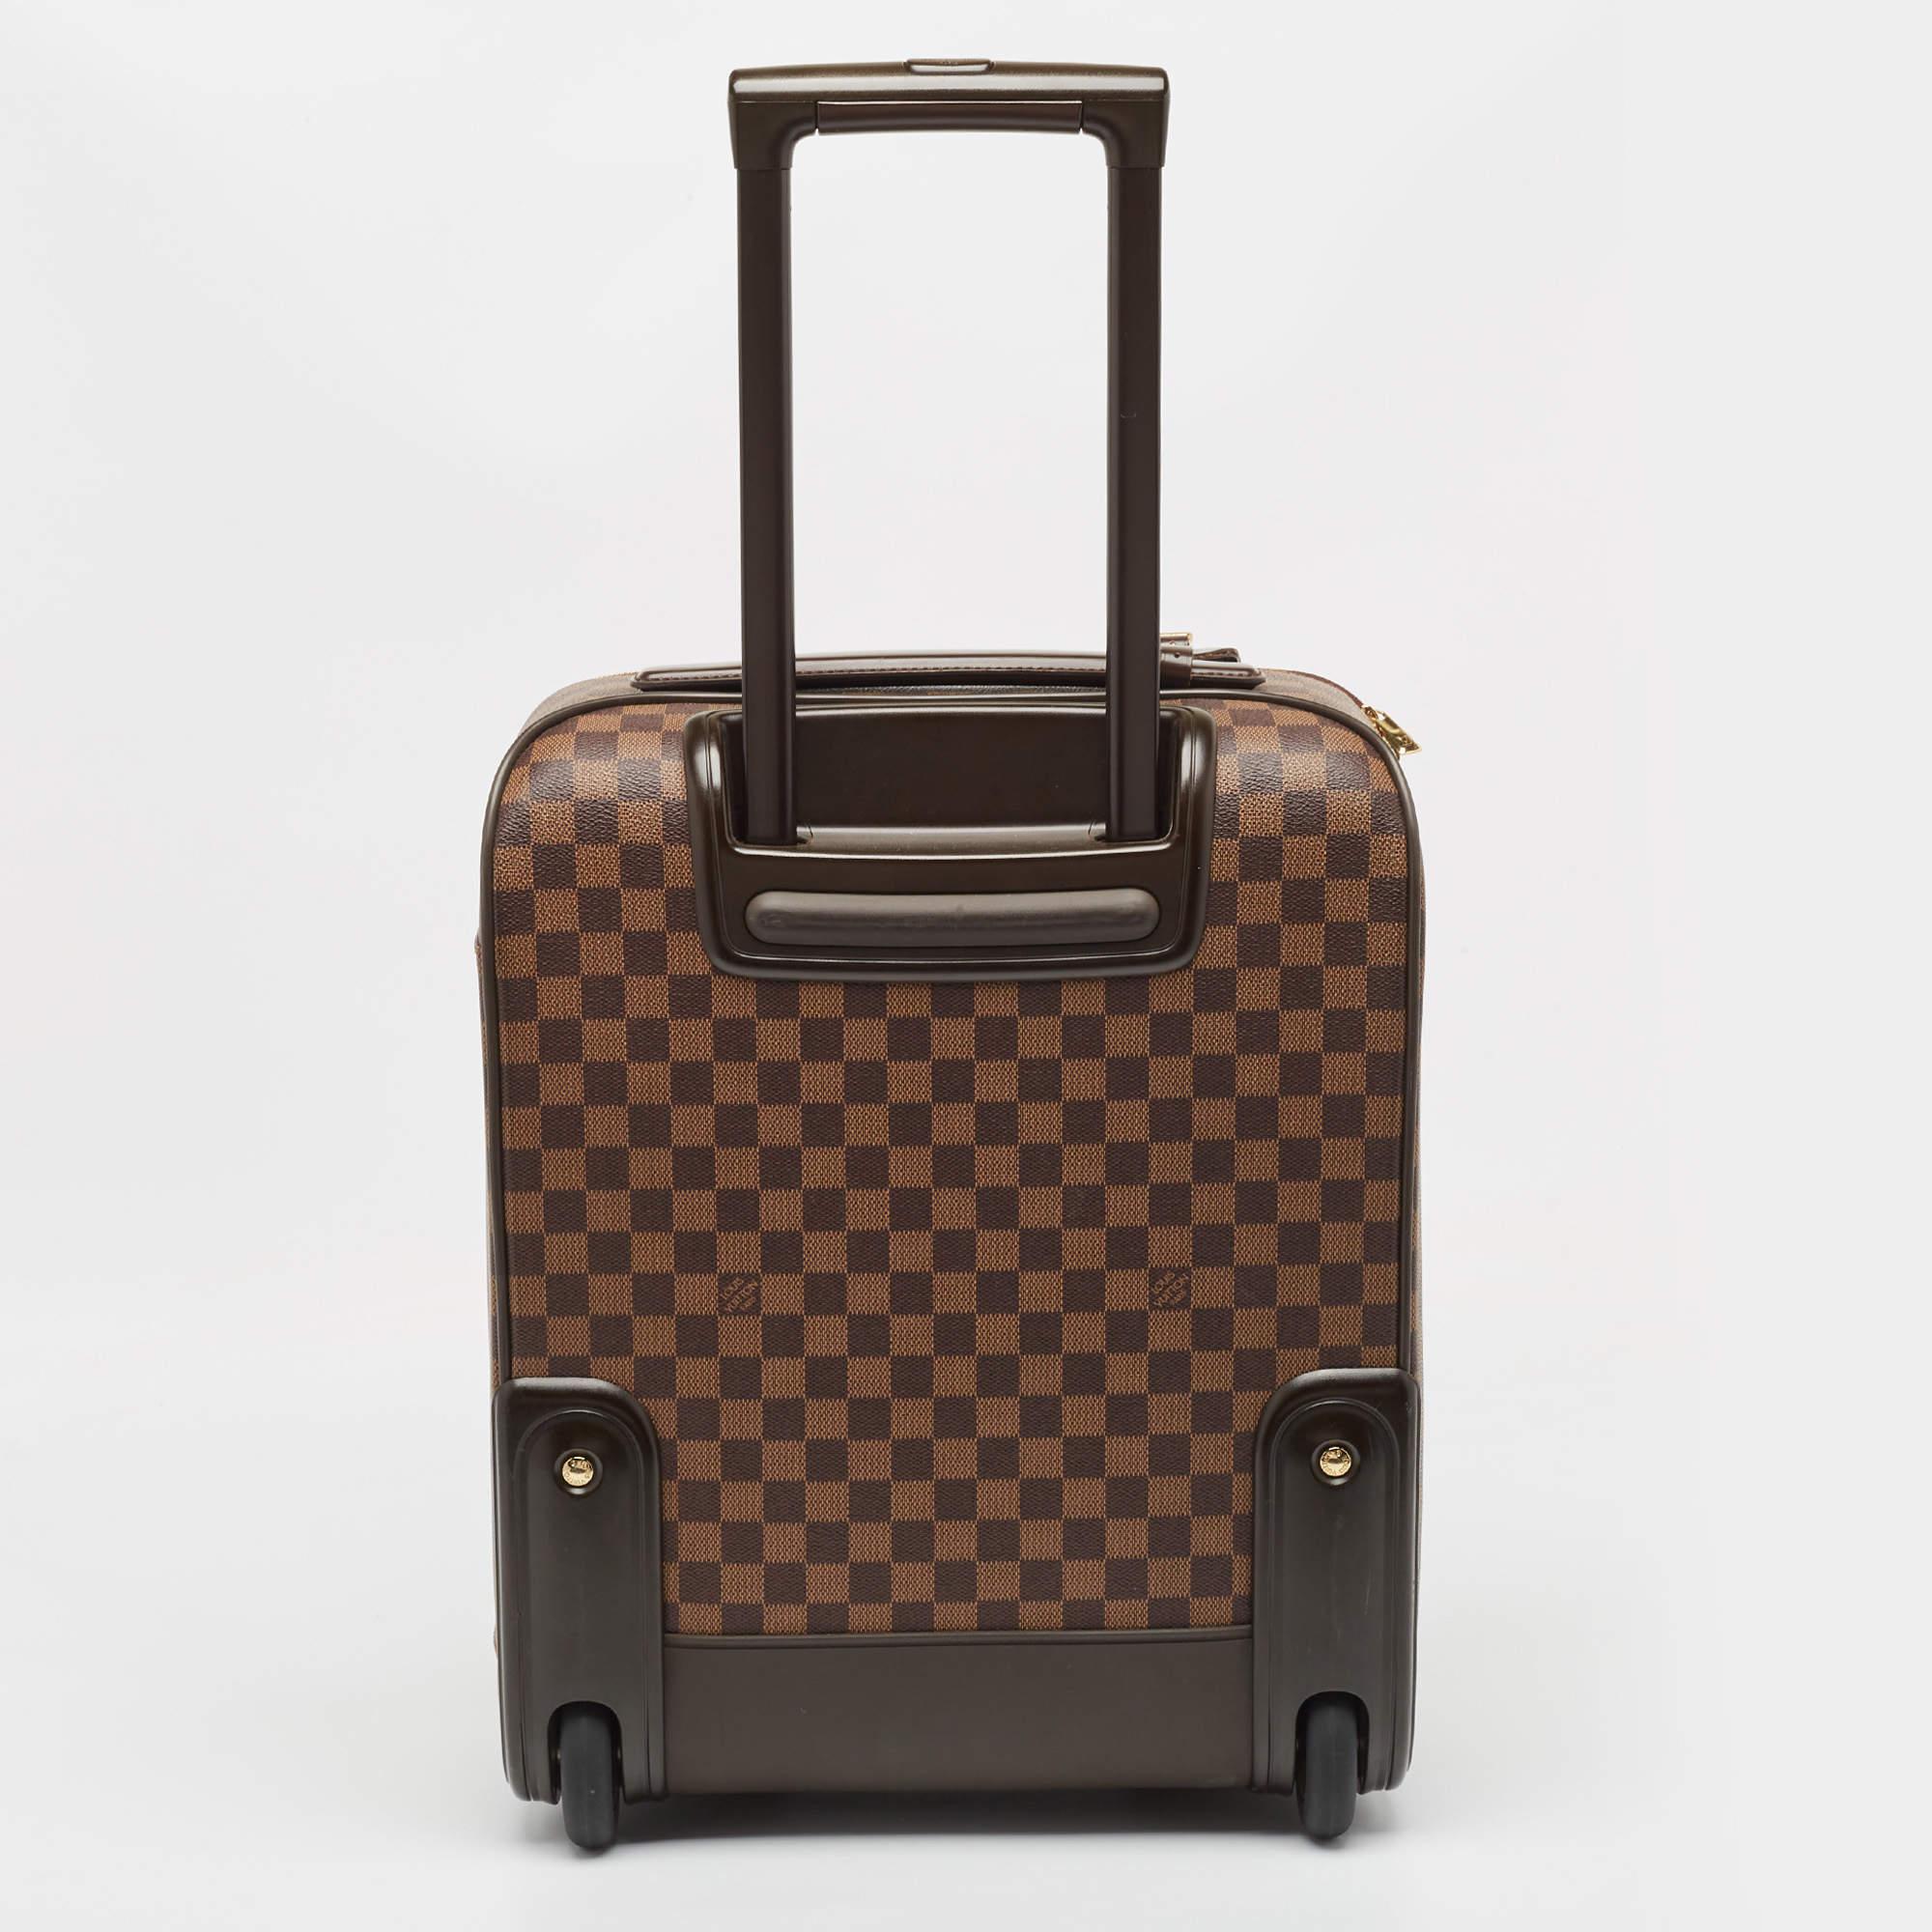 Crafted from iconic Damier Ebene canvas, the Louis Vuitton Pegase 45 luggage seamlessly merges style and functionality. Its spacious interior is complemented by multiple compartments, offering effortless organization. With smooth rolling wheels and